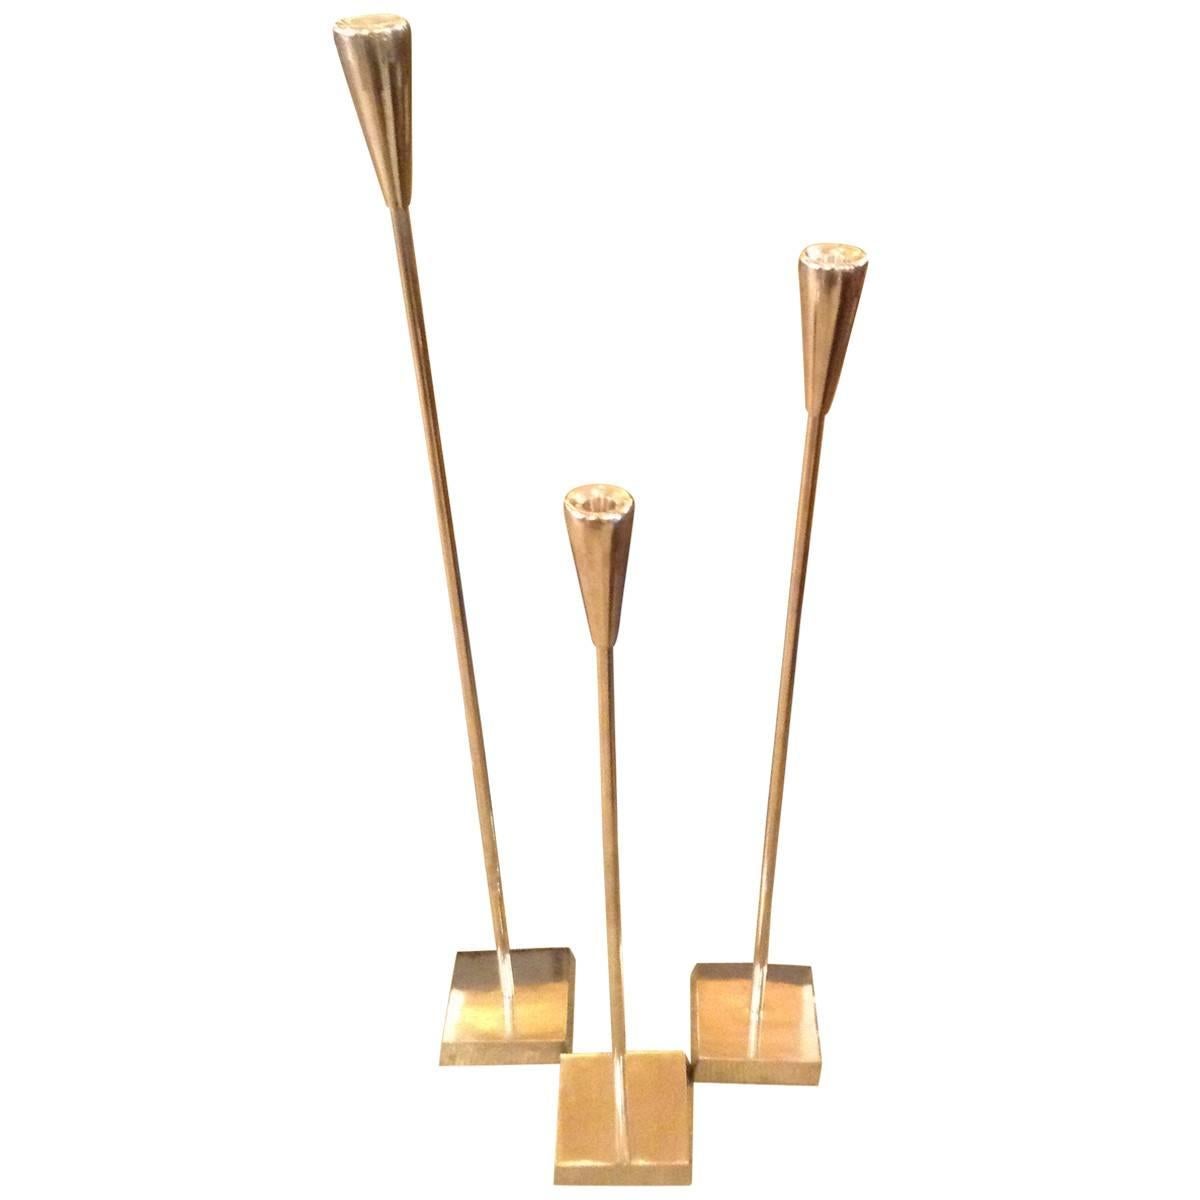 Modern and elegant, this trio of tall, slender candle sticks will be the perfect touch beside a master bathtub or gathered on a fireplace hearth. Fashioned from aluminum, of varying heights, the polished silver finish gives them an extra dose of